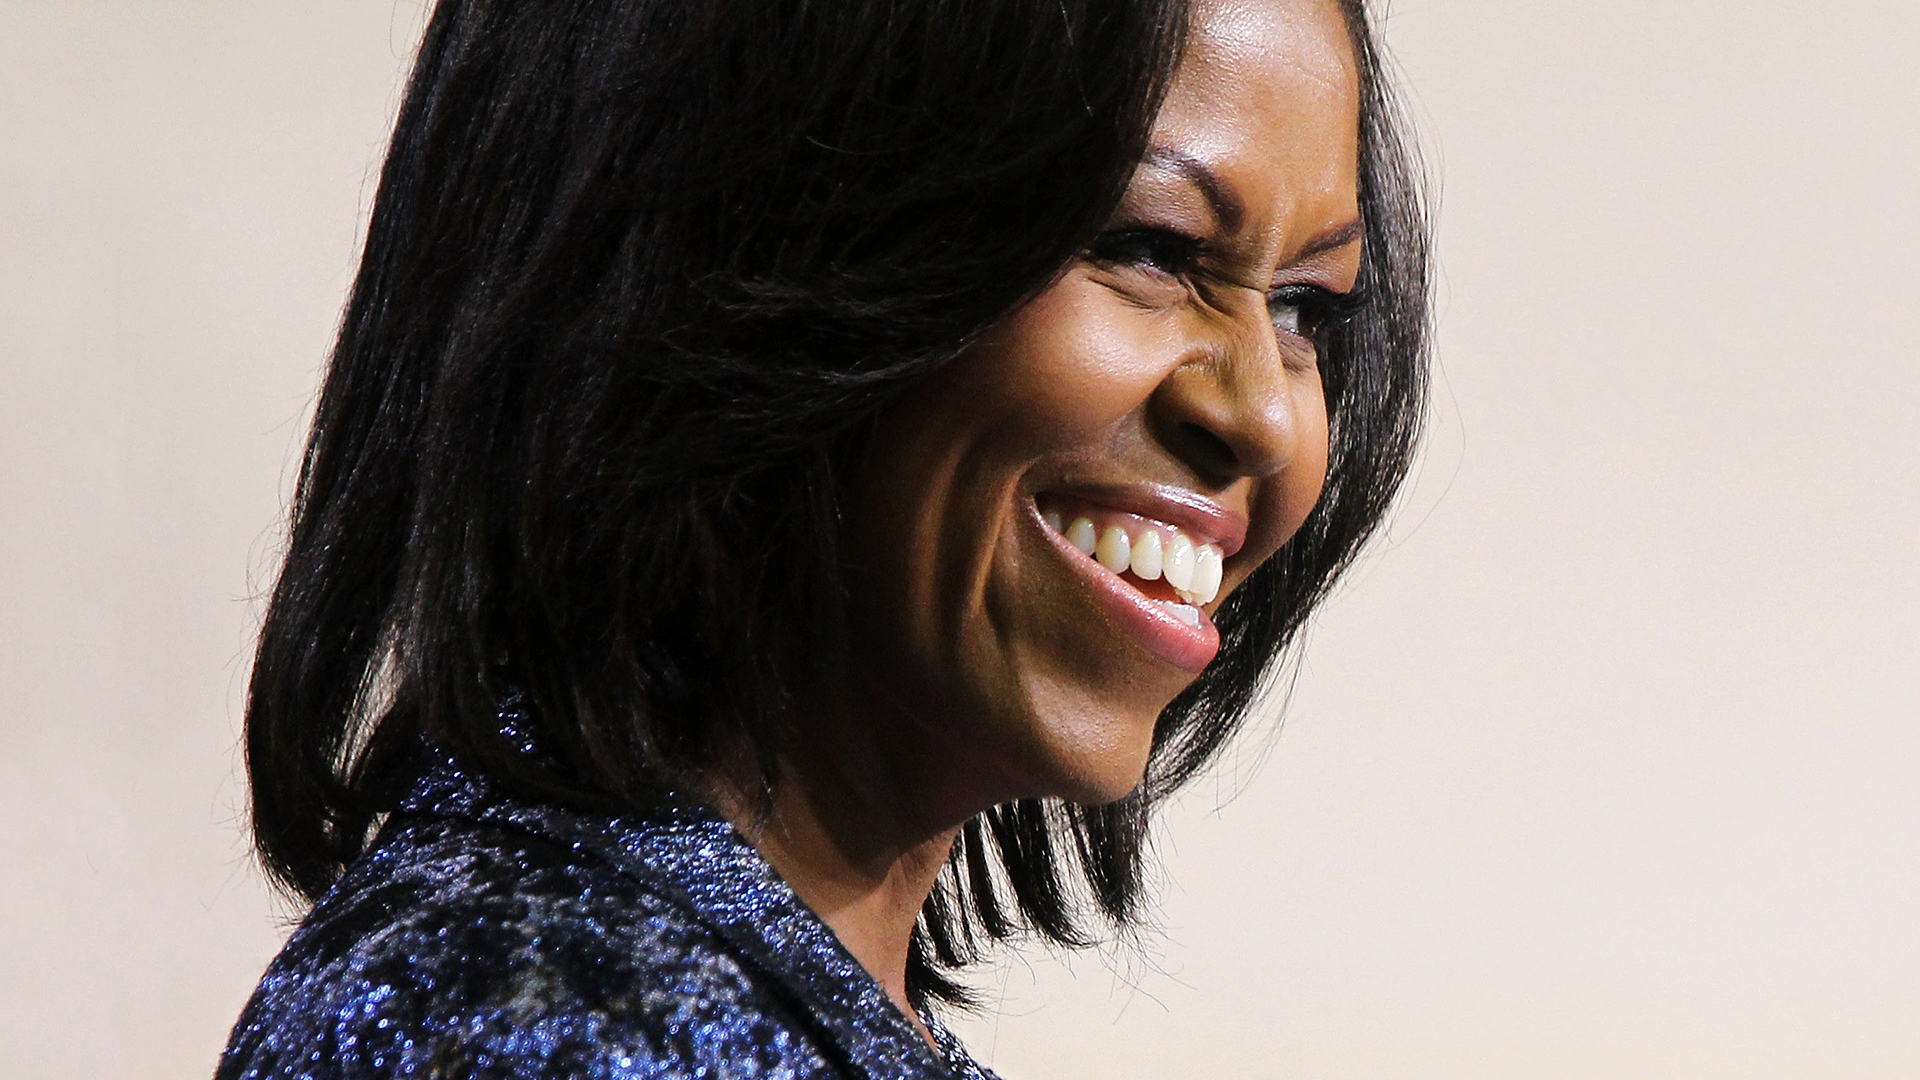 January 17, 1964: Michelle Obama Was Born and Became America’s First African-American First Lady